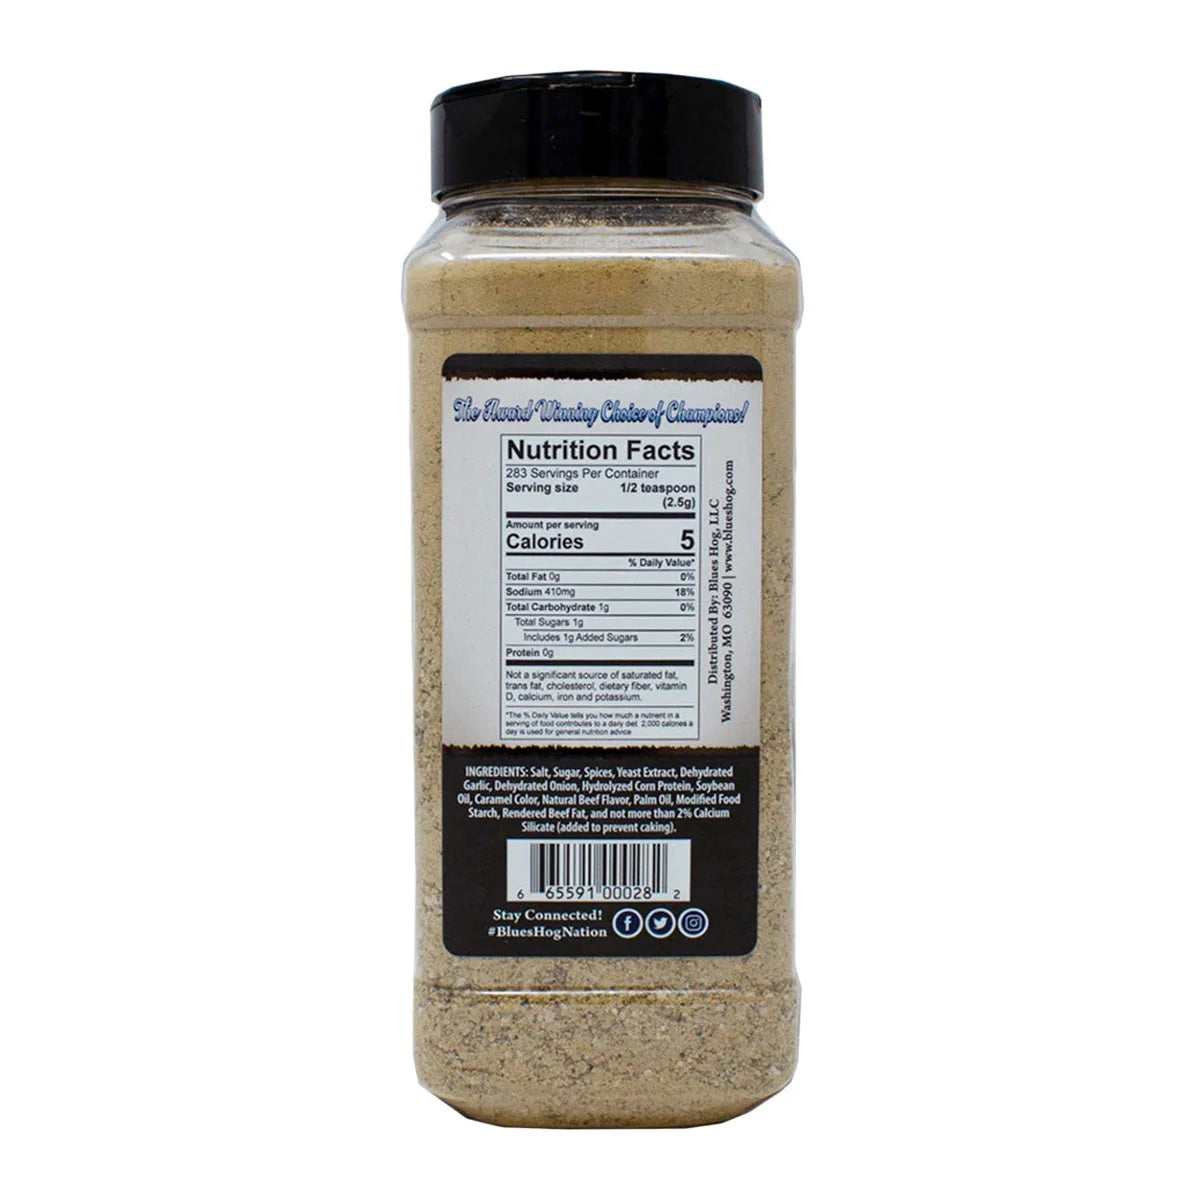 The back of a jar of Blues Hog Bold & Beefy Seasoning with a black lid. The label includes the nutrition facts and ingredient list. It indicates 283 servings per container, with each serving size being 1/2 teaspoon (2.5g). The mix contains 5 calories, 1g total fat, 410mg sodium, 1g total carbohydrate, and 0g protein per serving. Ingredients include salt, sugar, spices, yeast extract, dehydrated garlic and onion, hydrolyzed corn protein, and more.